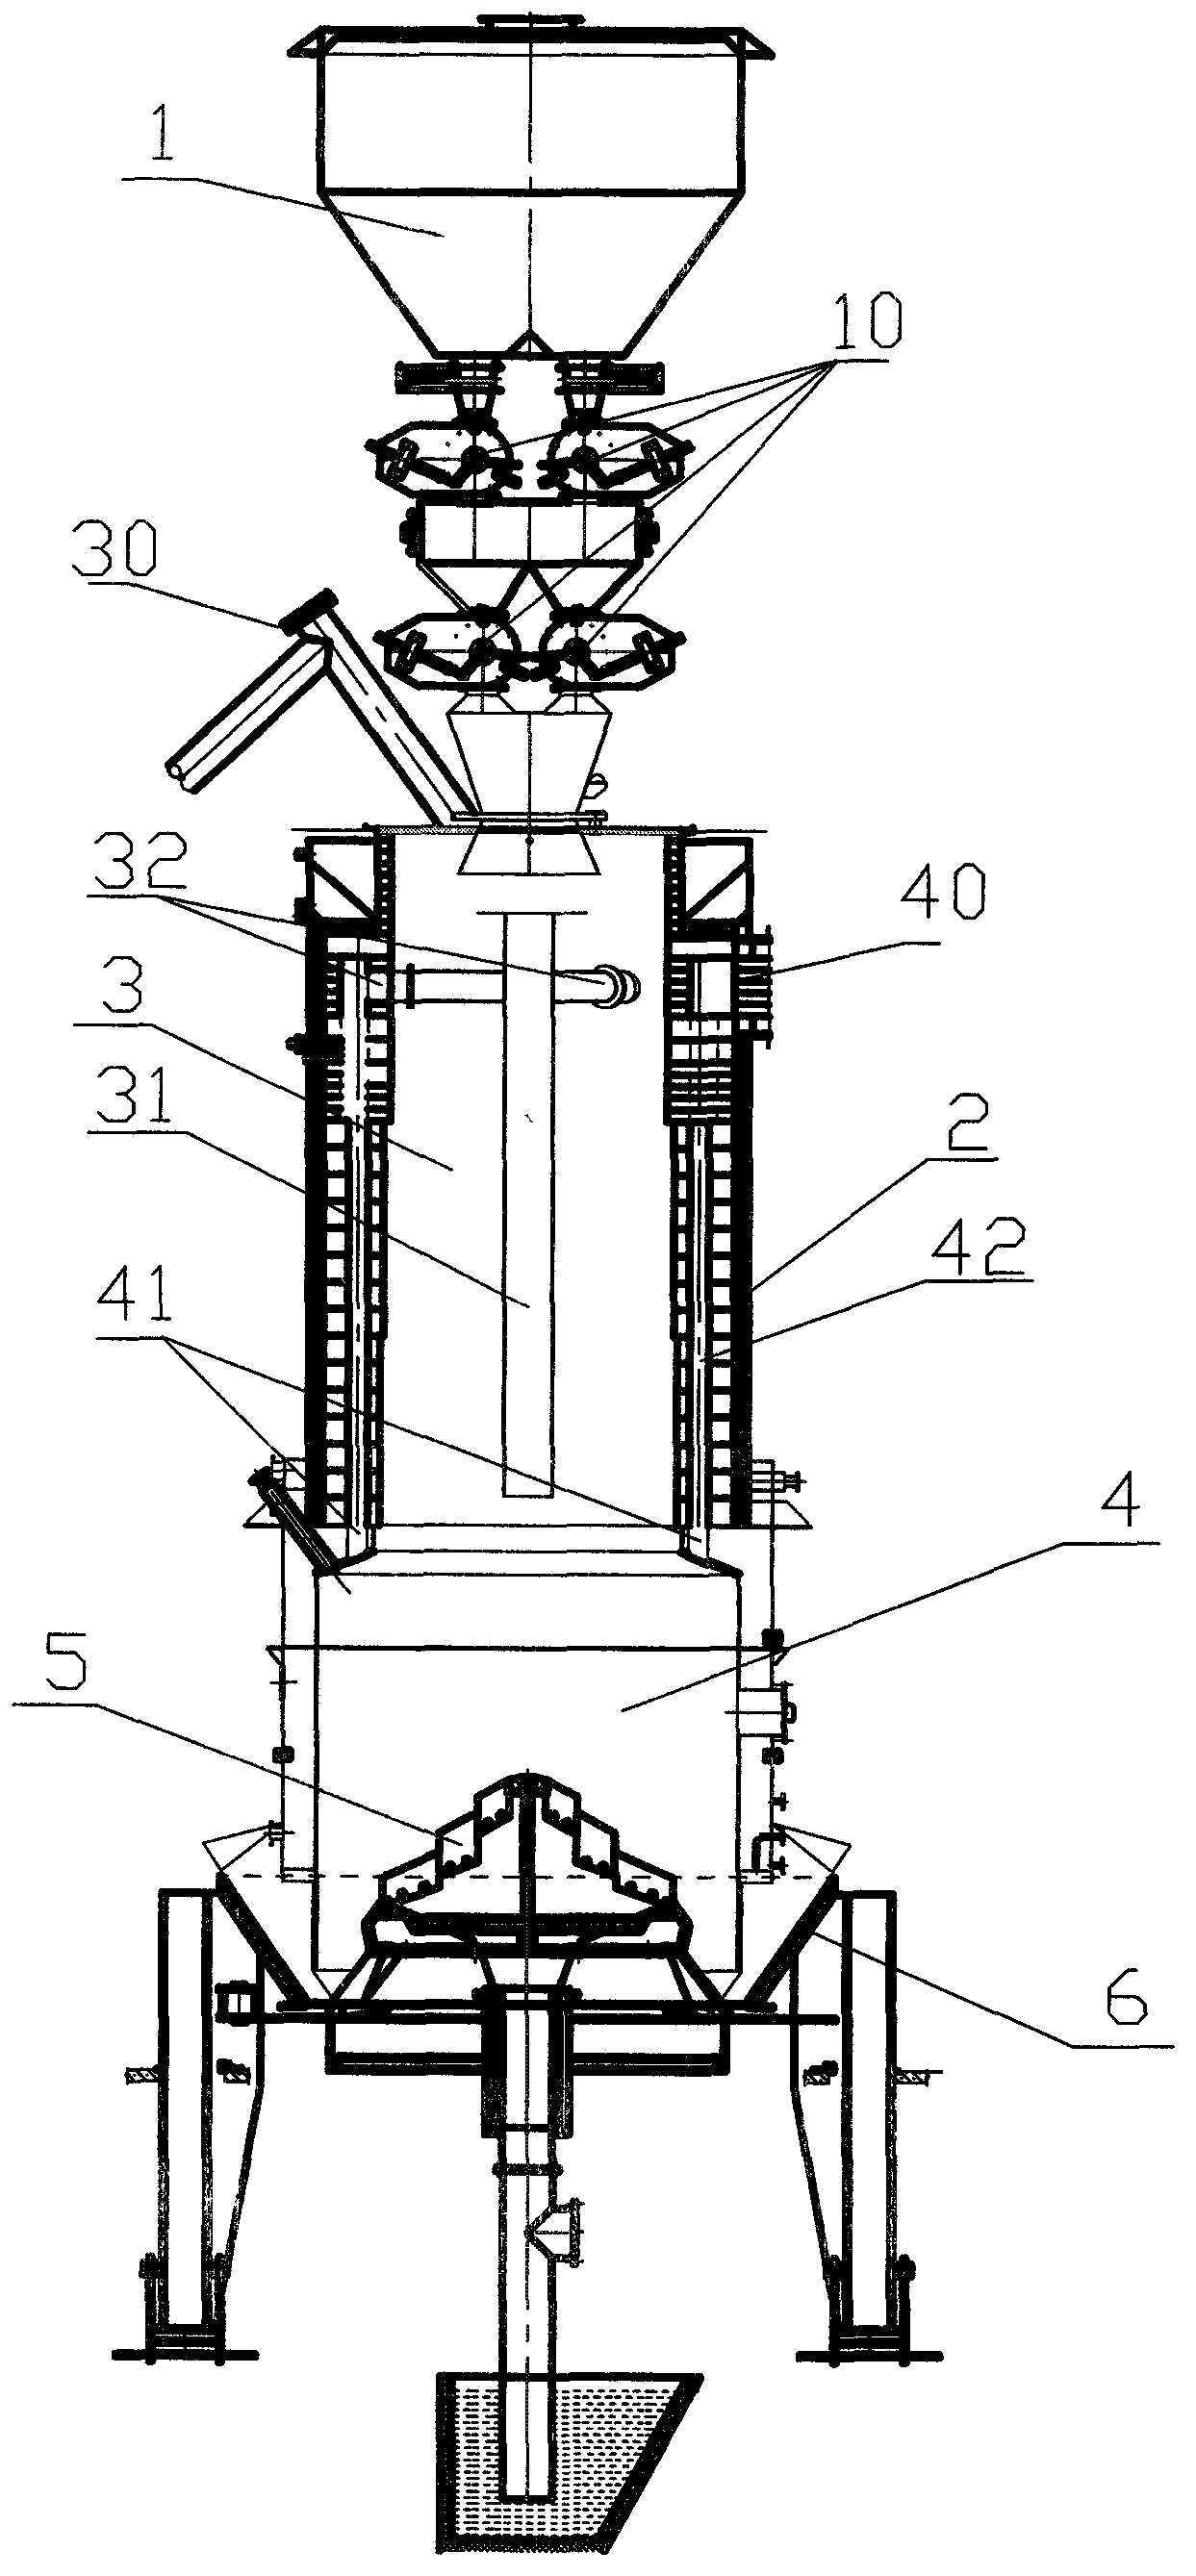 Two-stage coal gas generating device